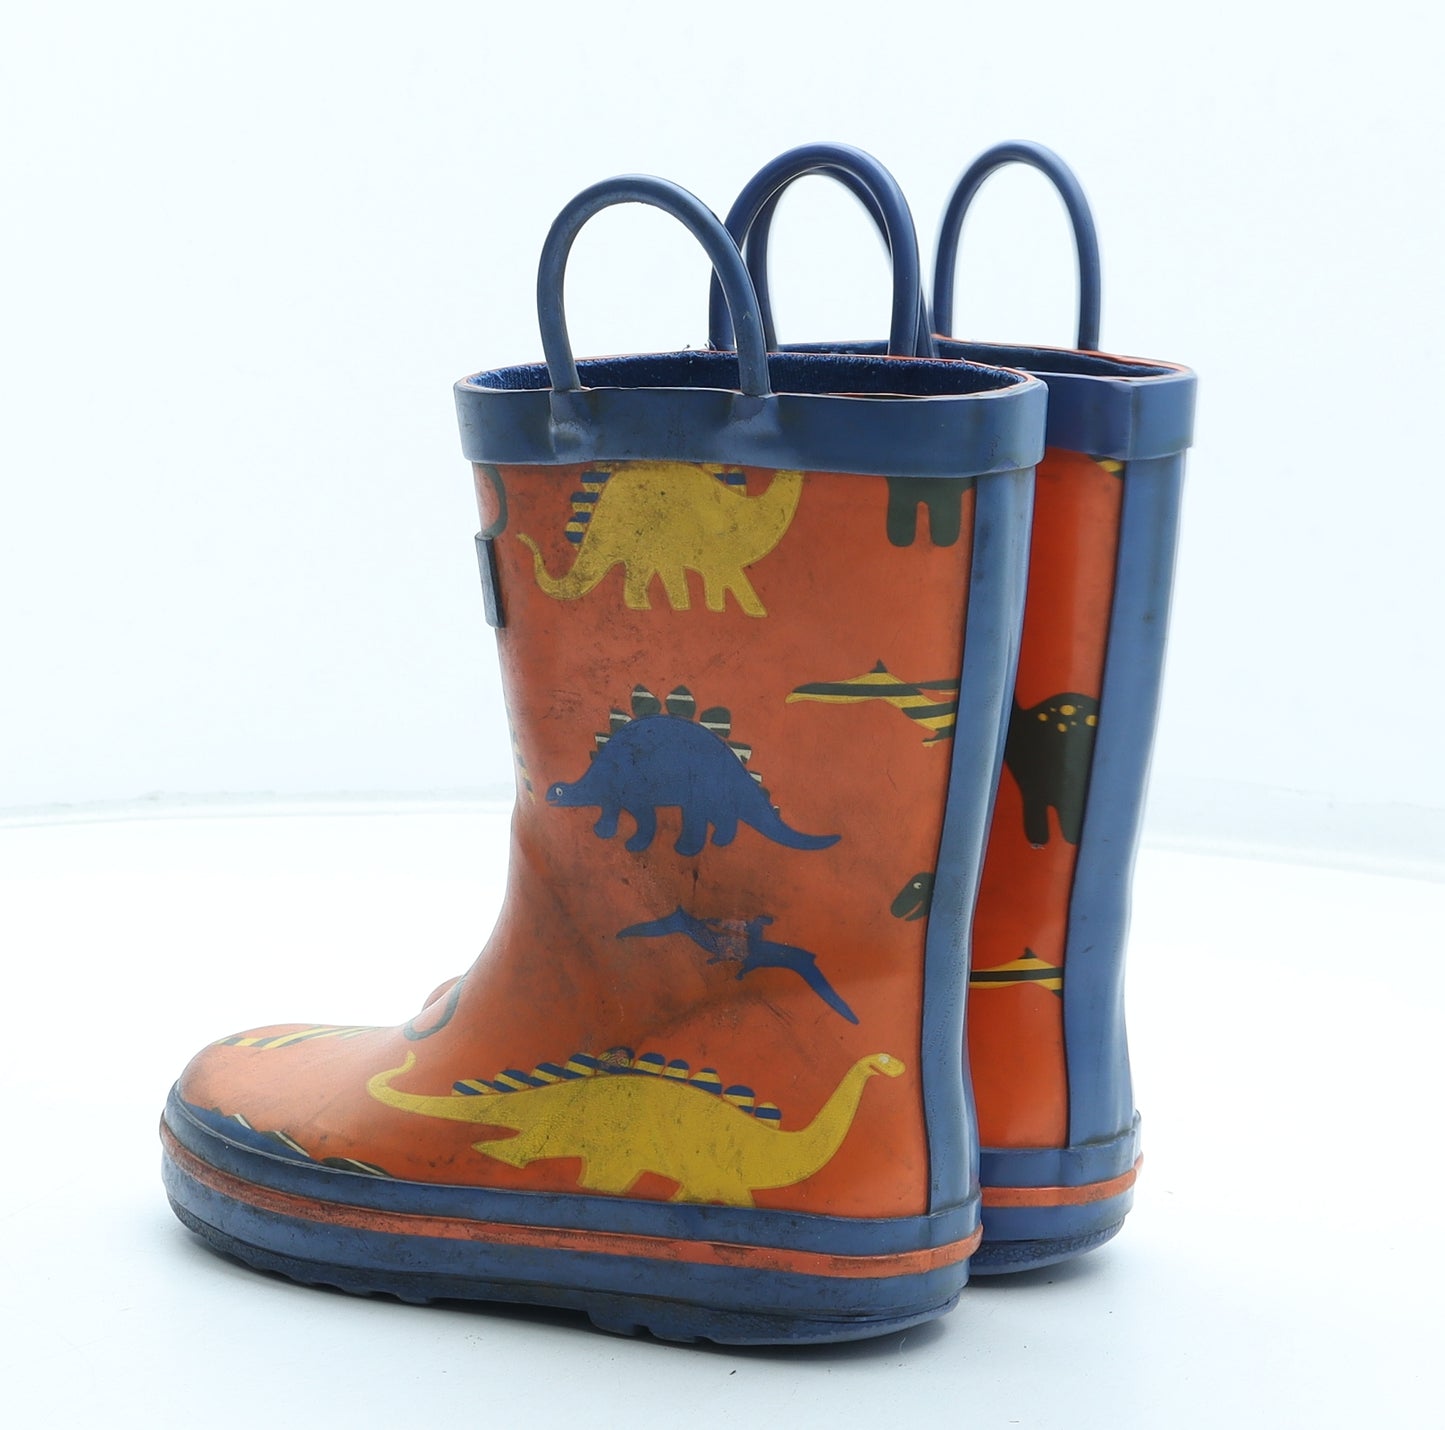 Rydale Boys Multicoloured Floral Rubber Wellies Boot UK 10 27 - Dinosaur Pattern